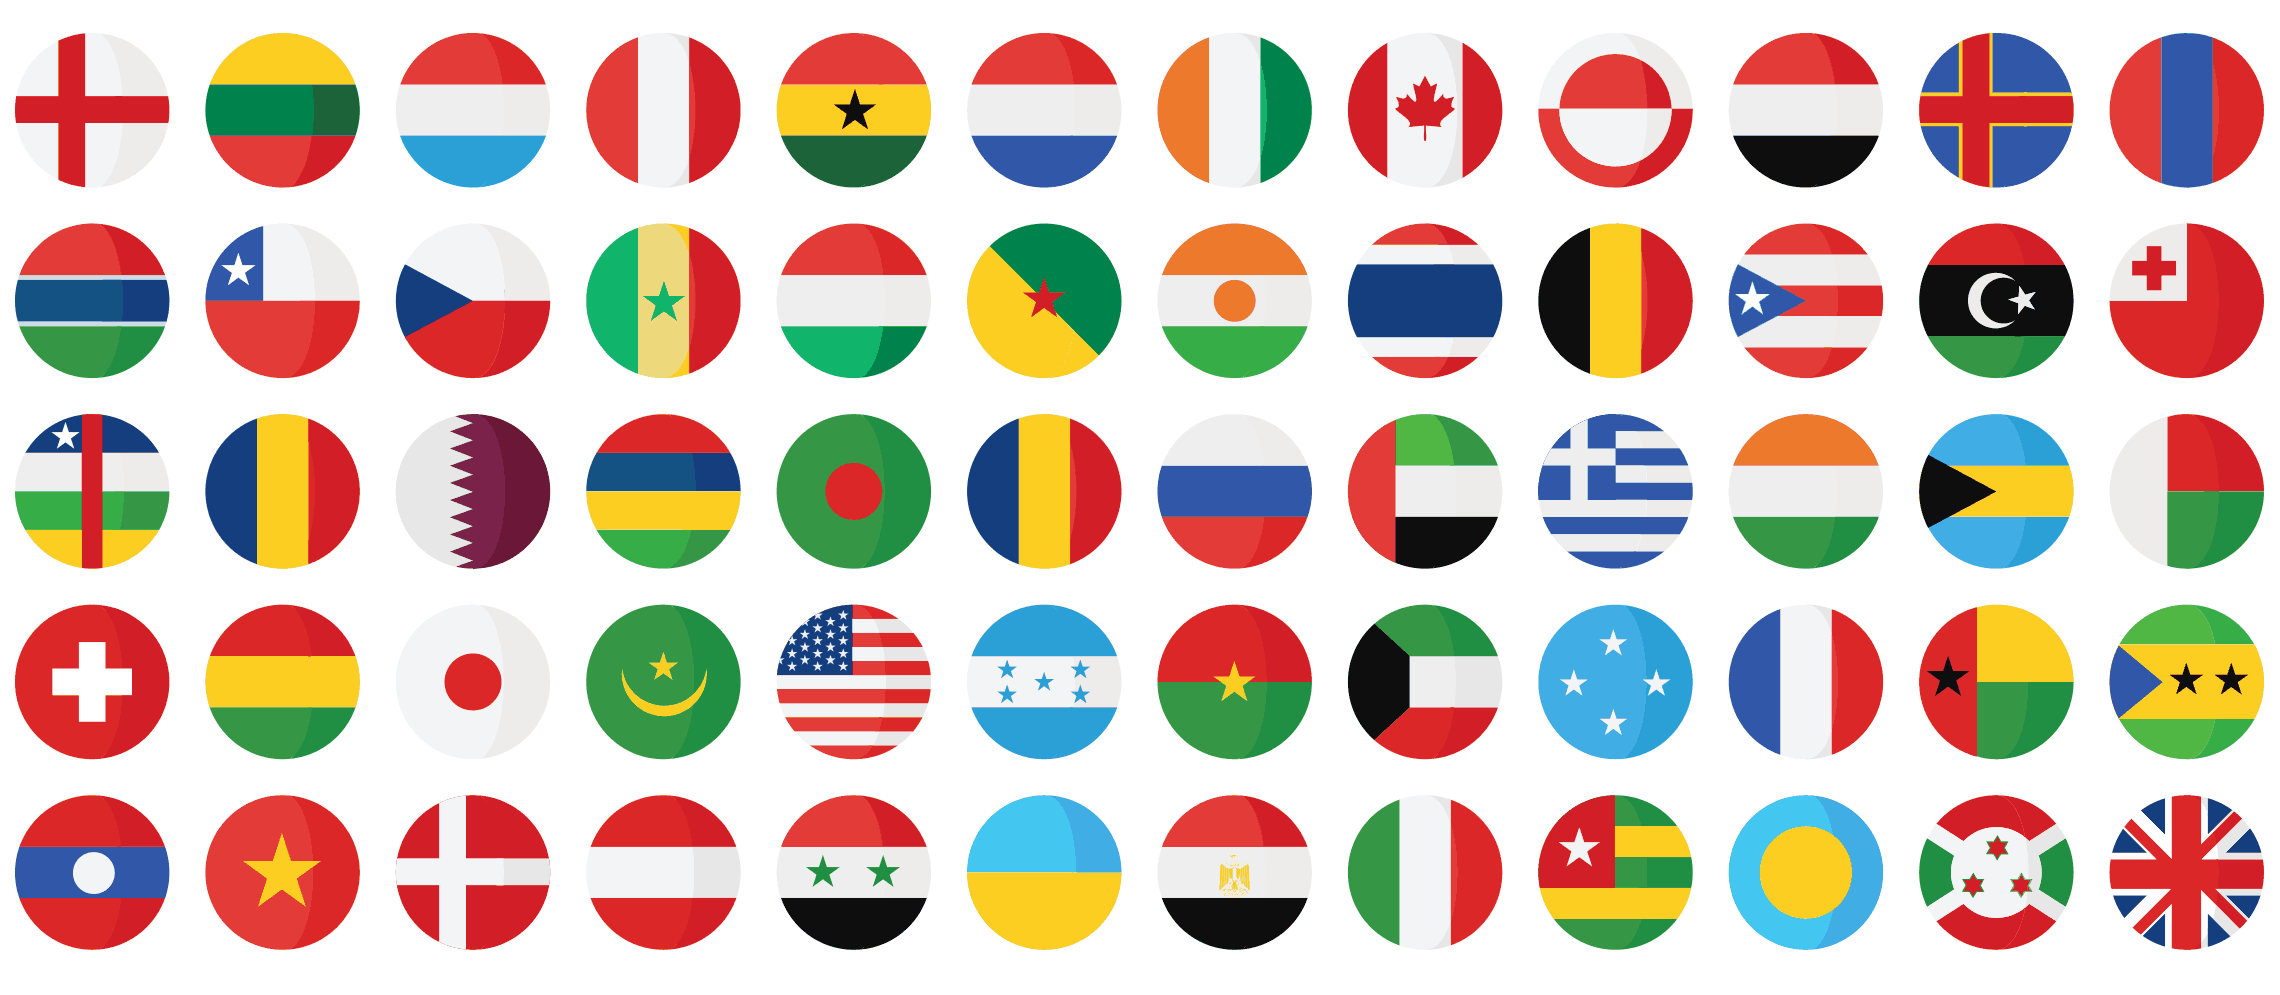 flags-1-flat-icons-vol-1-preview